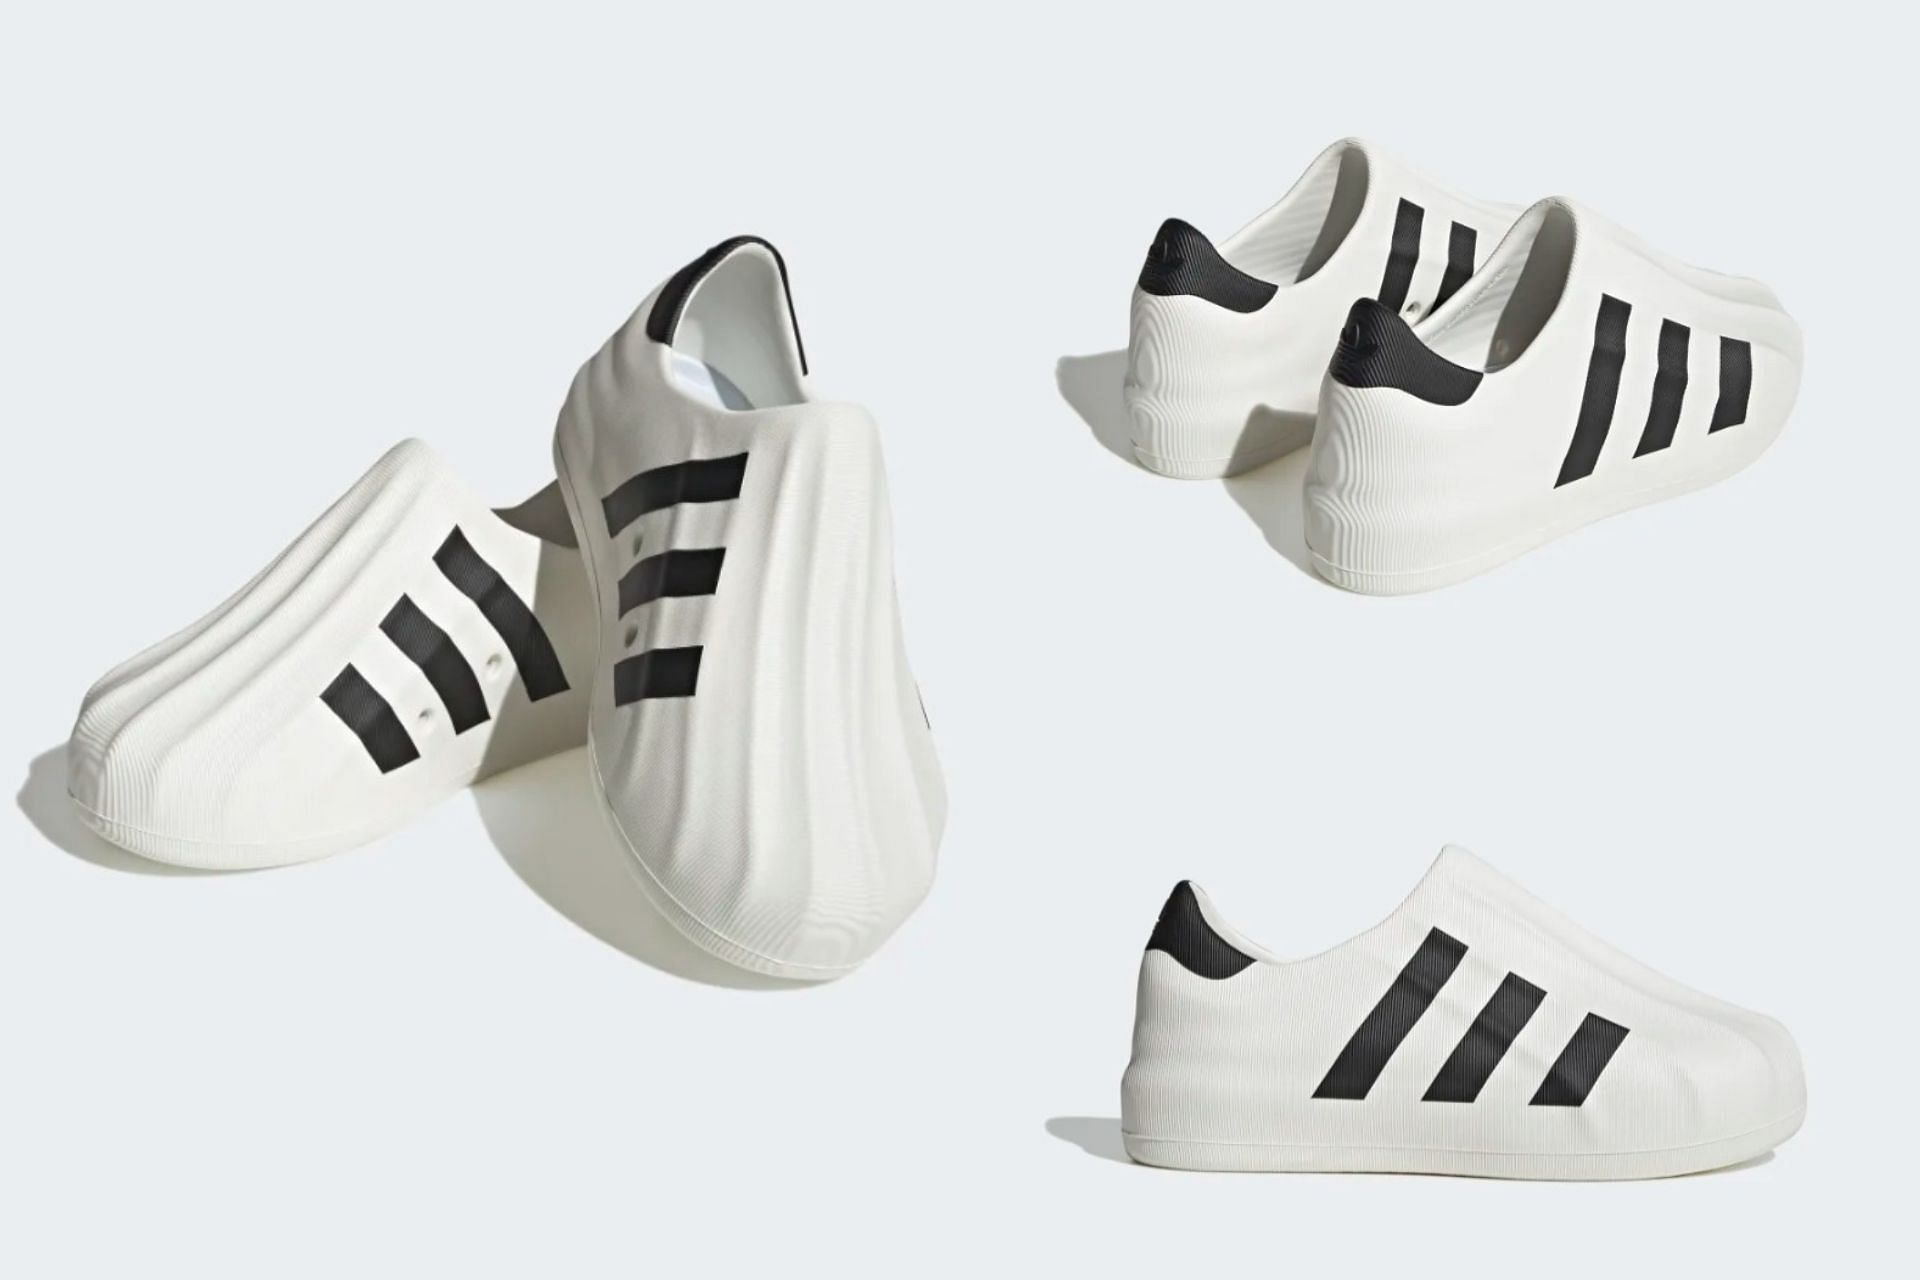 Adidas Adifom Superstar shoes: Where to buy, price, more details explored